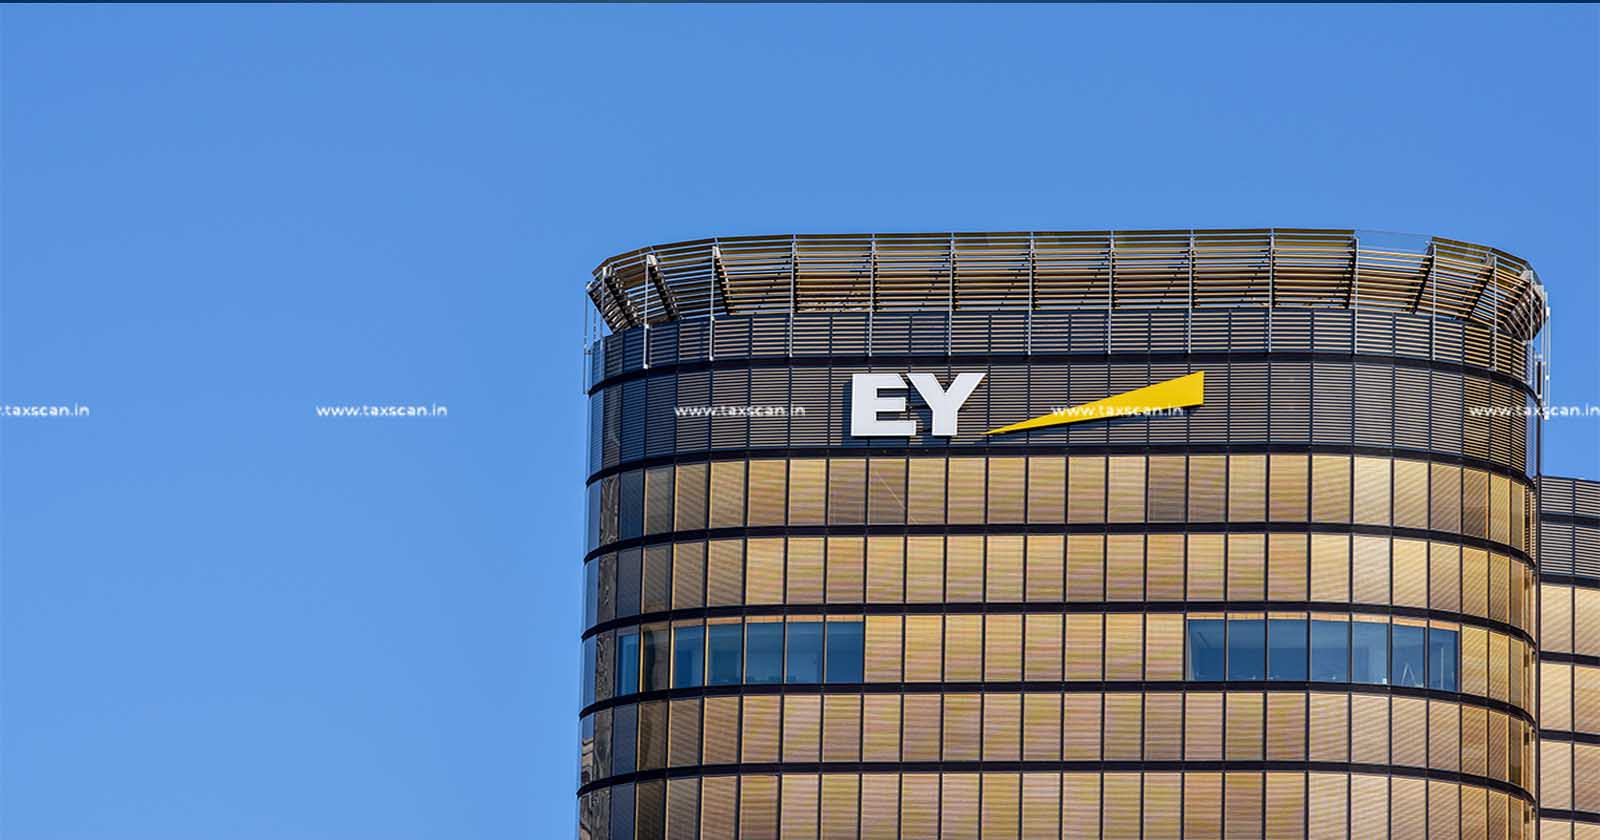 EY India - EY - Supplier - Professional Consultancy Services - Overseas Entities - Delhi Highcourt - GST ITC Refund Claim - taxscan